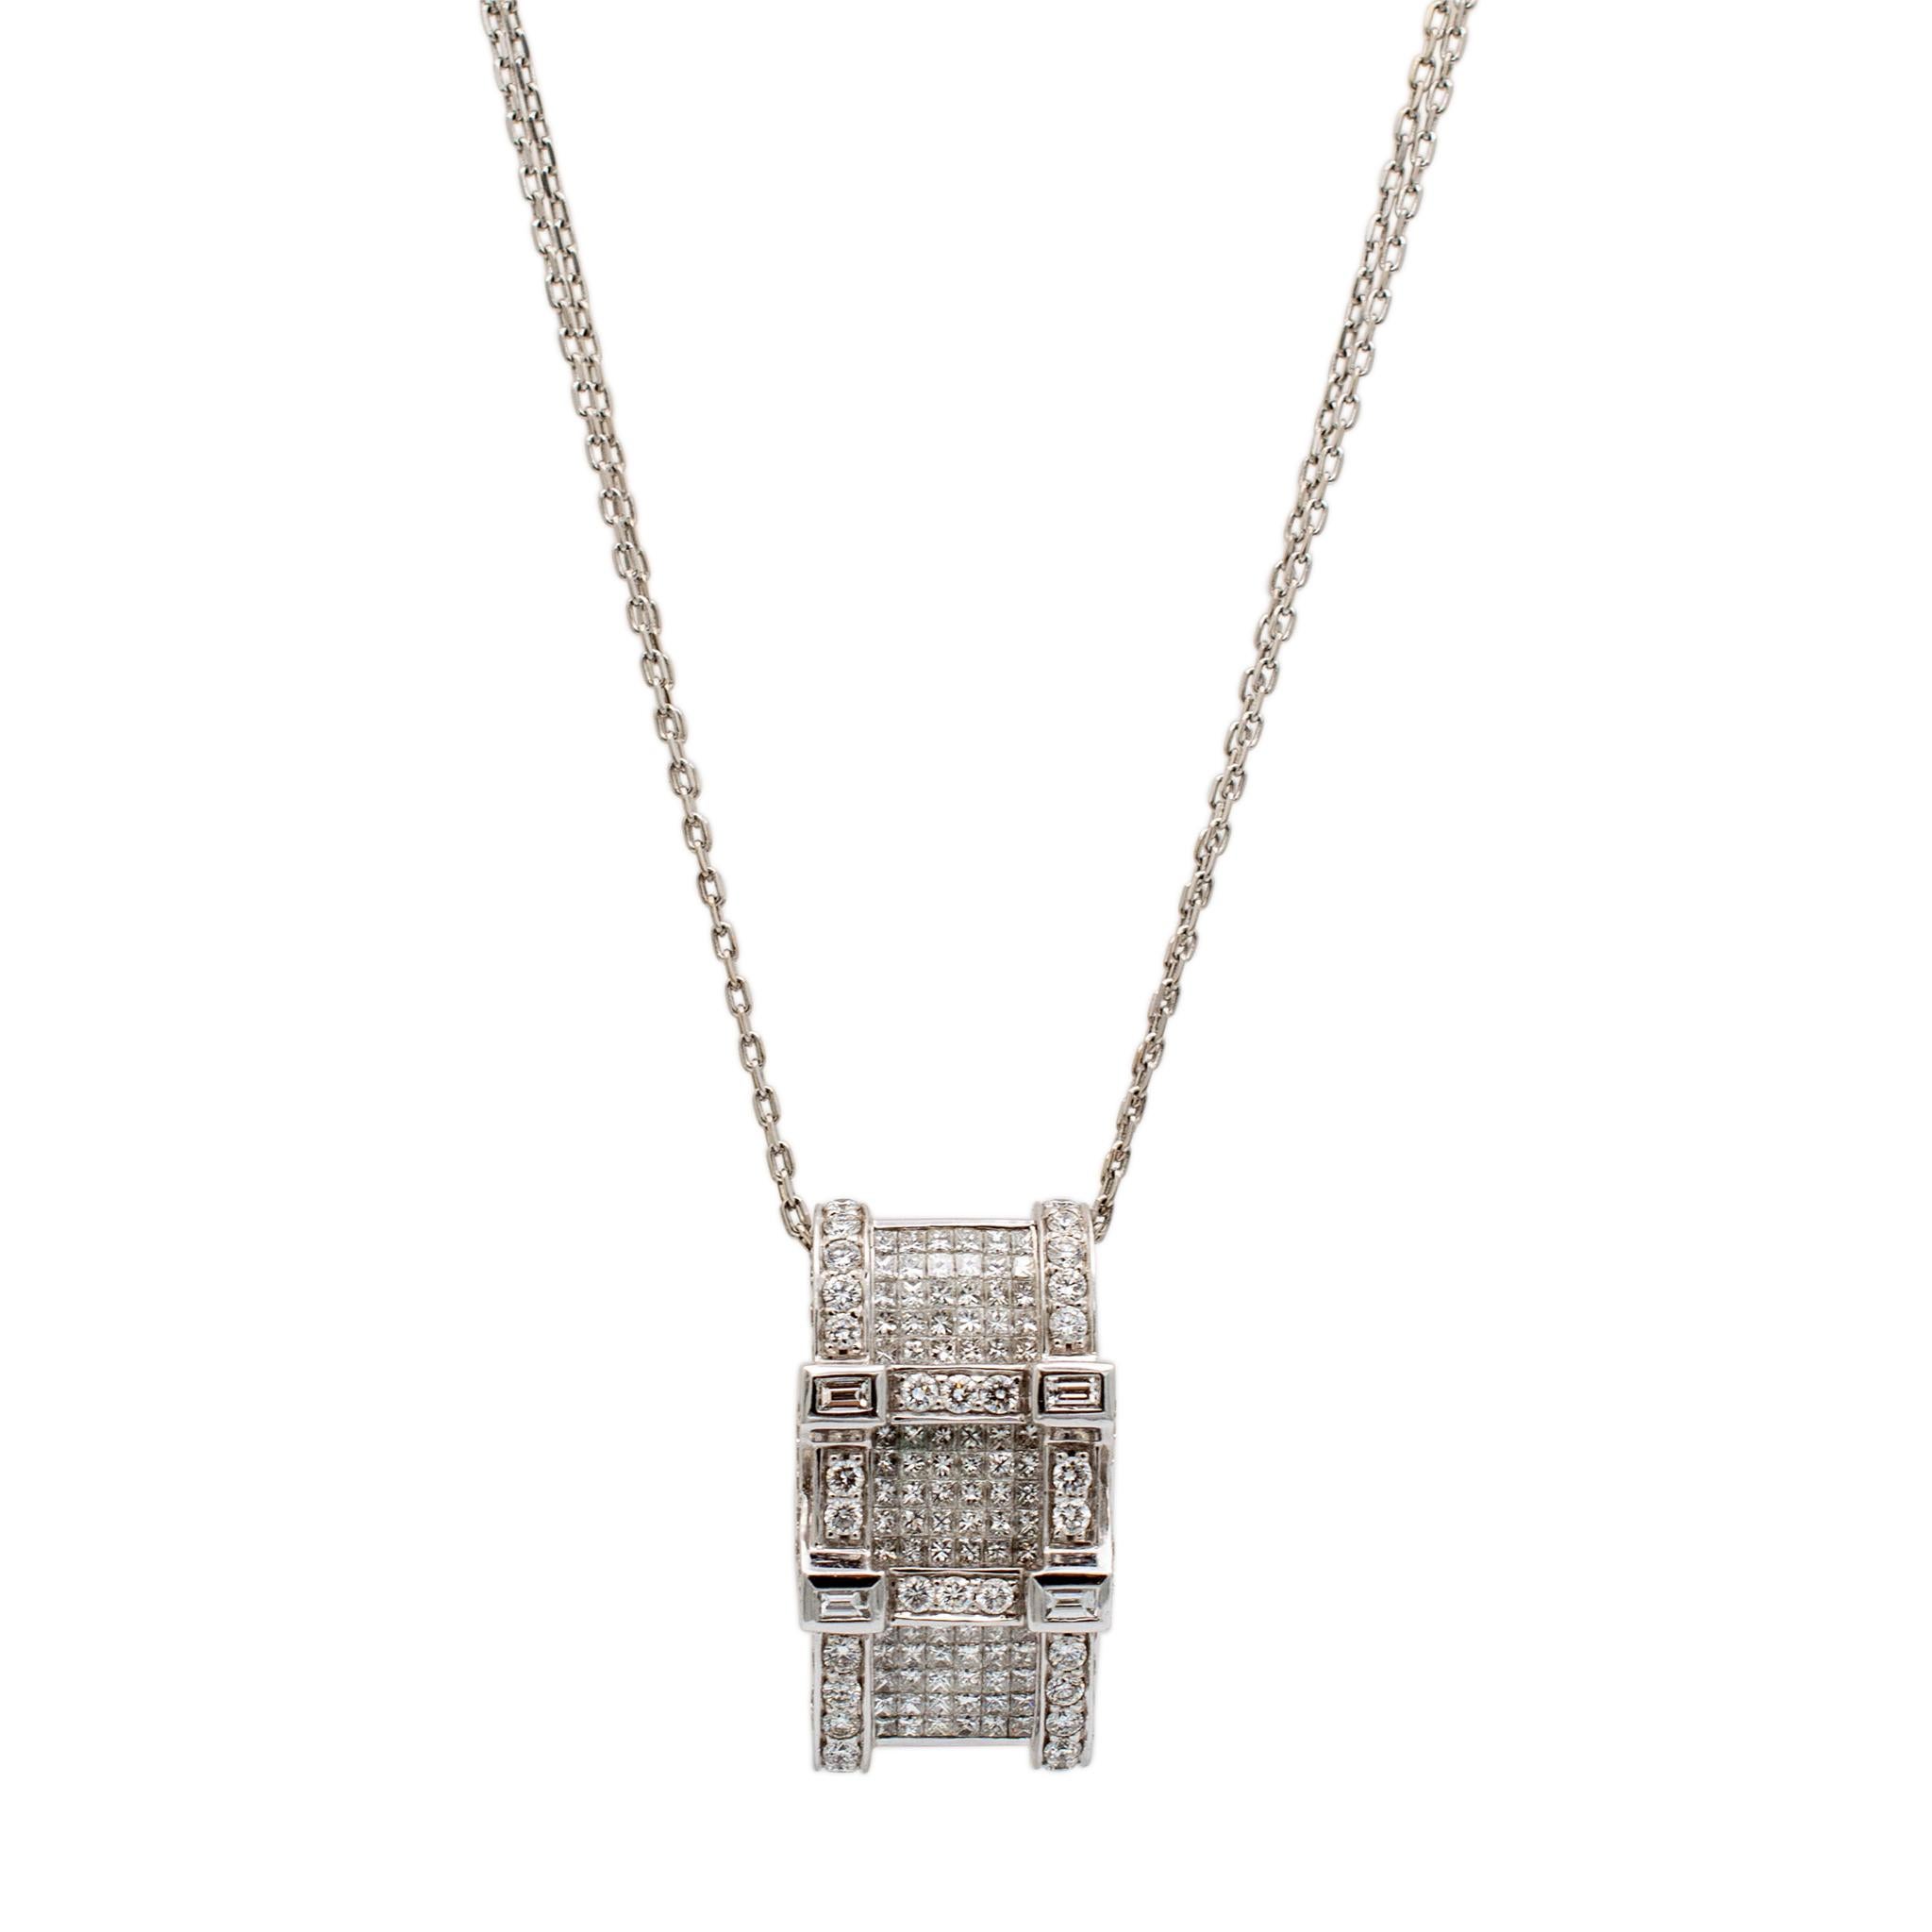 Gender: Ladies

Material: 14K White Gold

Chain Length: 17.00 inches

Pendant Measurements: 30mm x 23mm

Weight: 22.80 grams

Ladies 18K white gold double strand collar diamond necklace.
Engraved with 